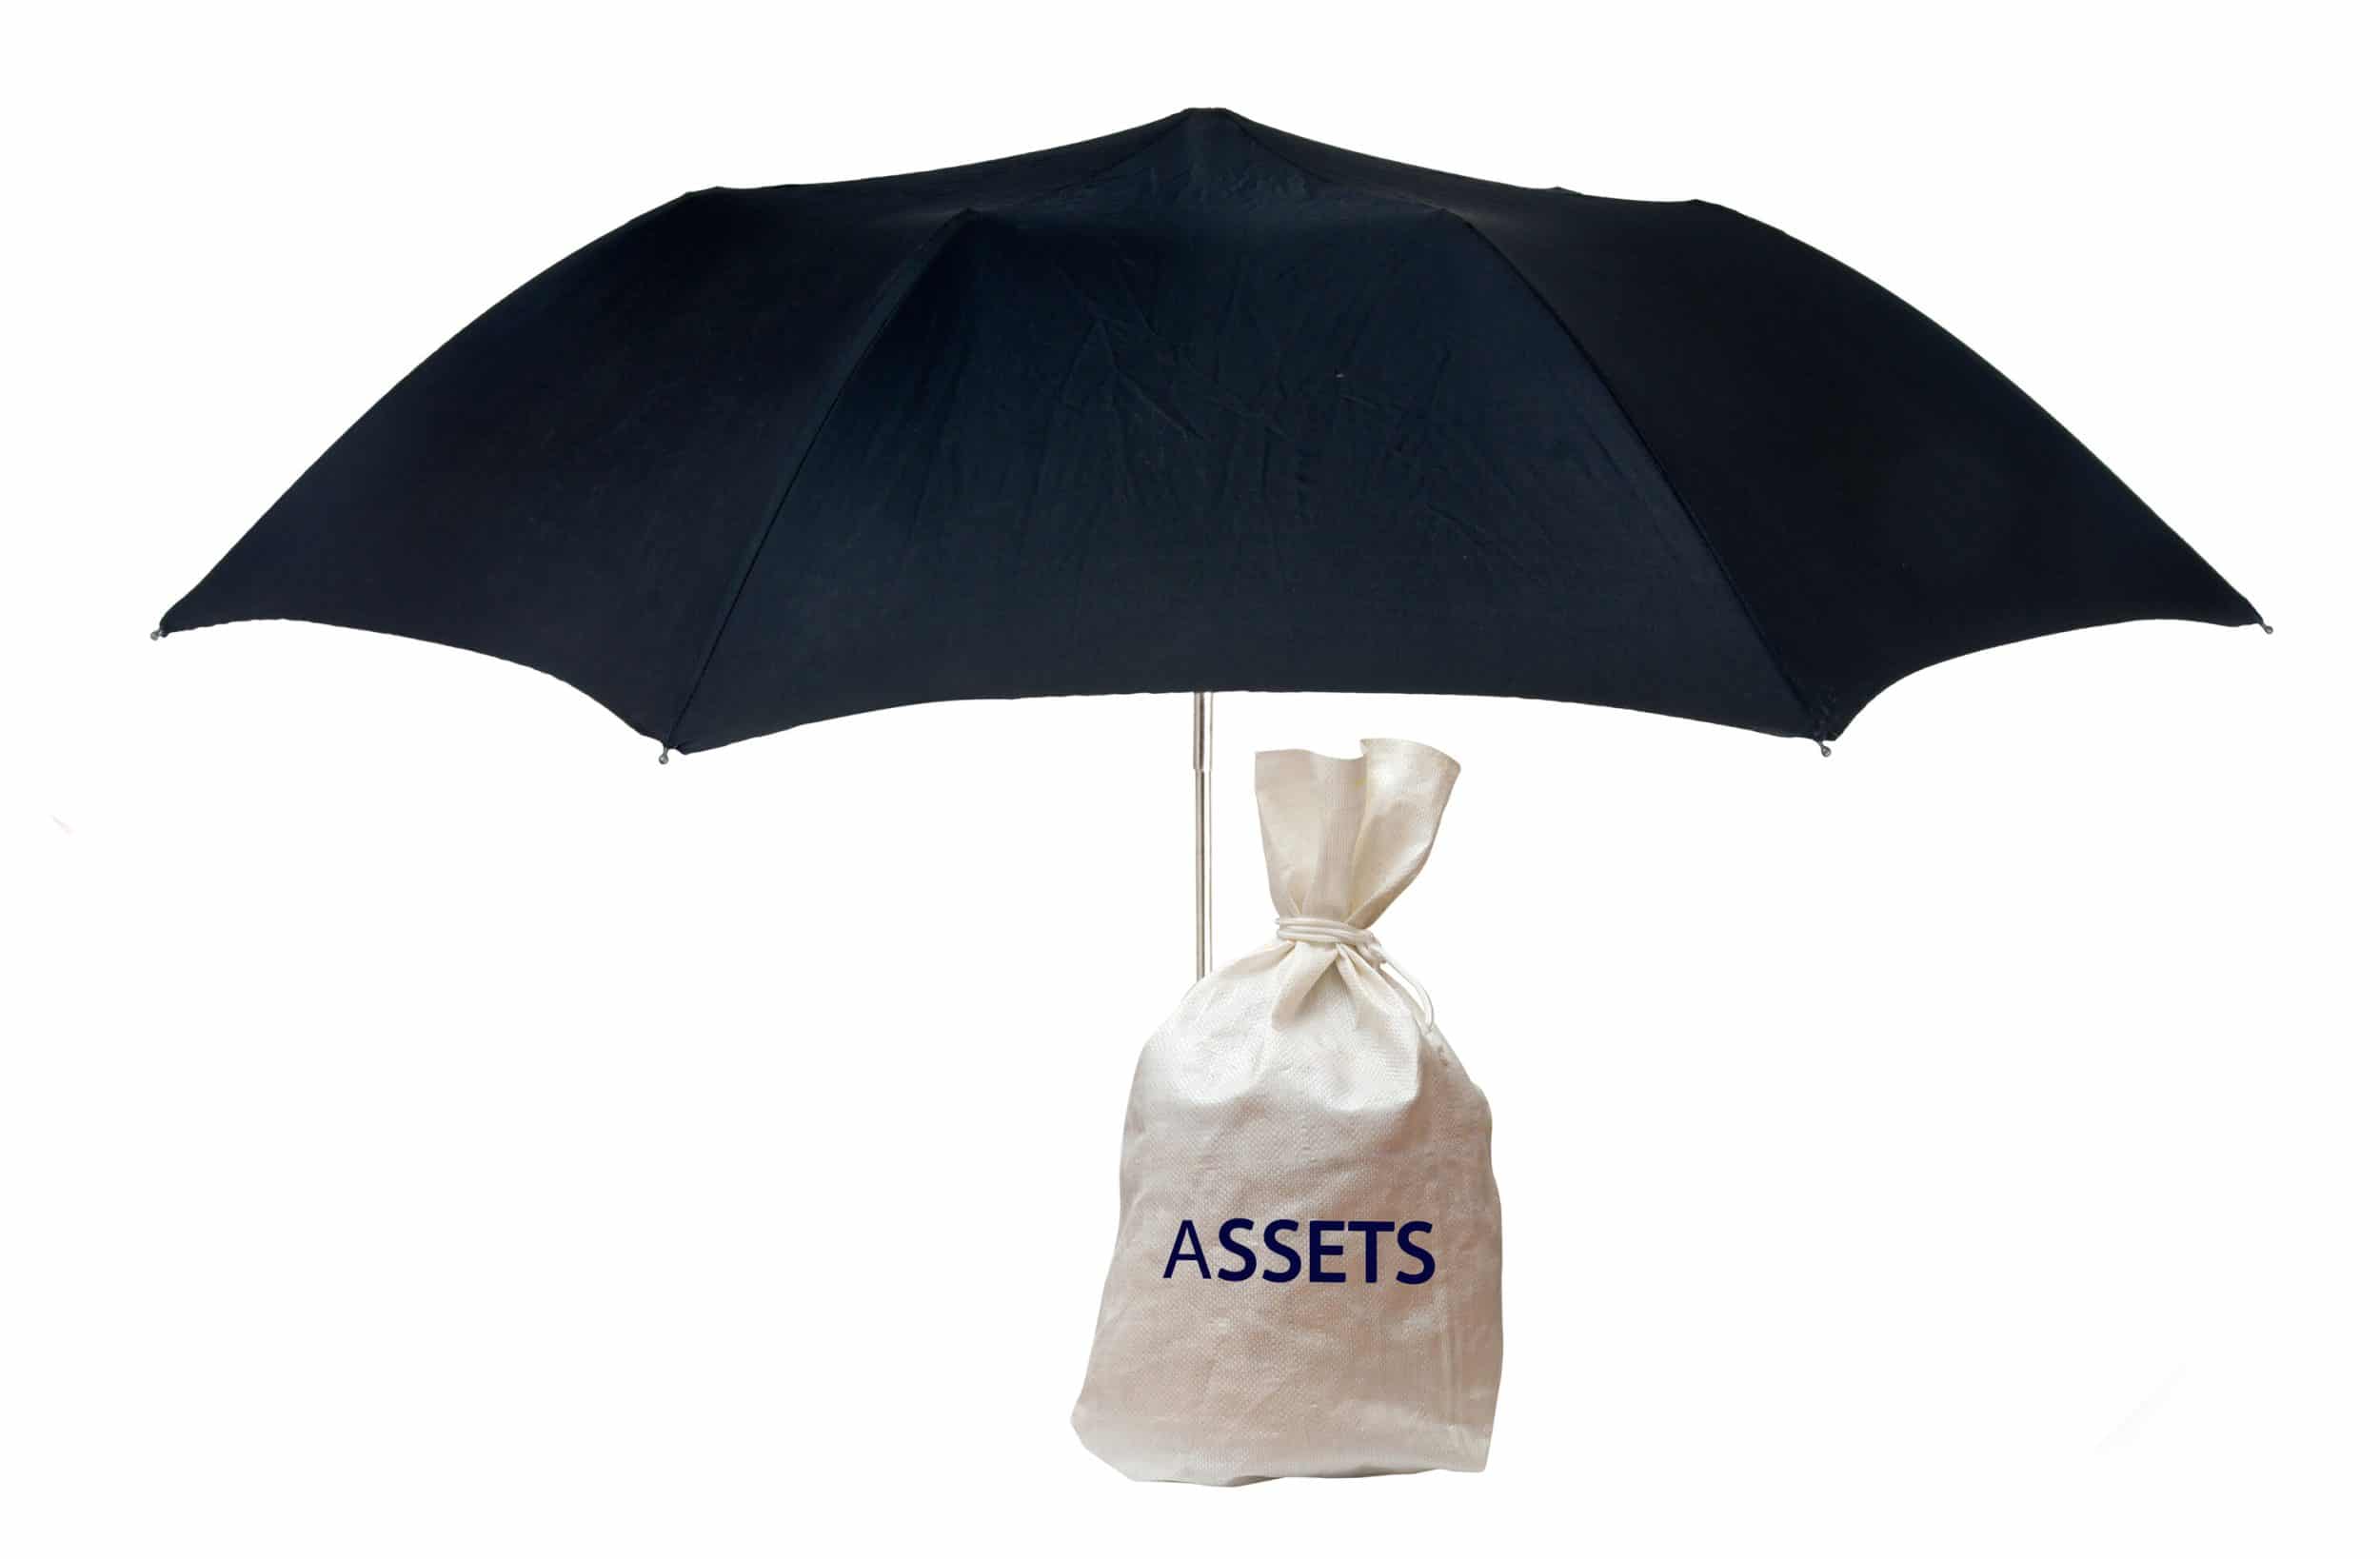 Don’t Fail to Plan for Protecting Your Valuable Assets